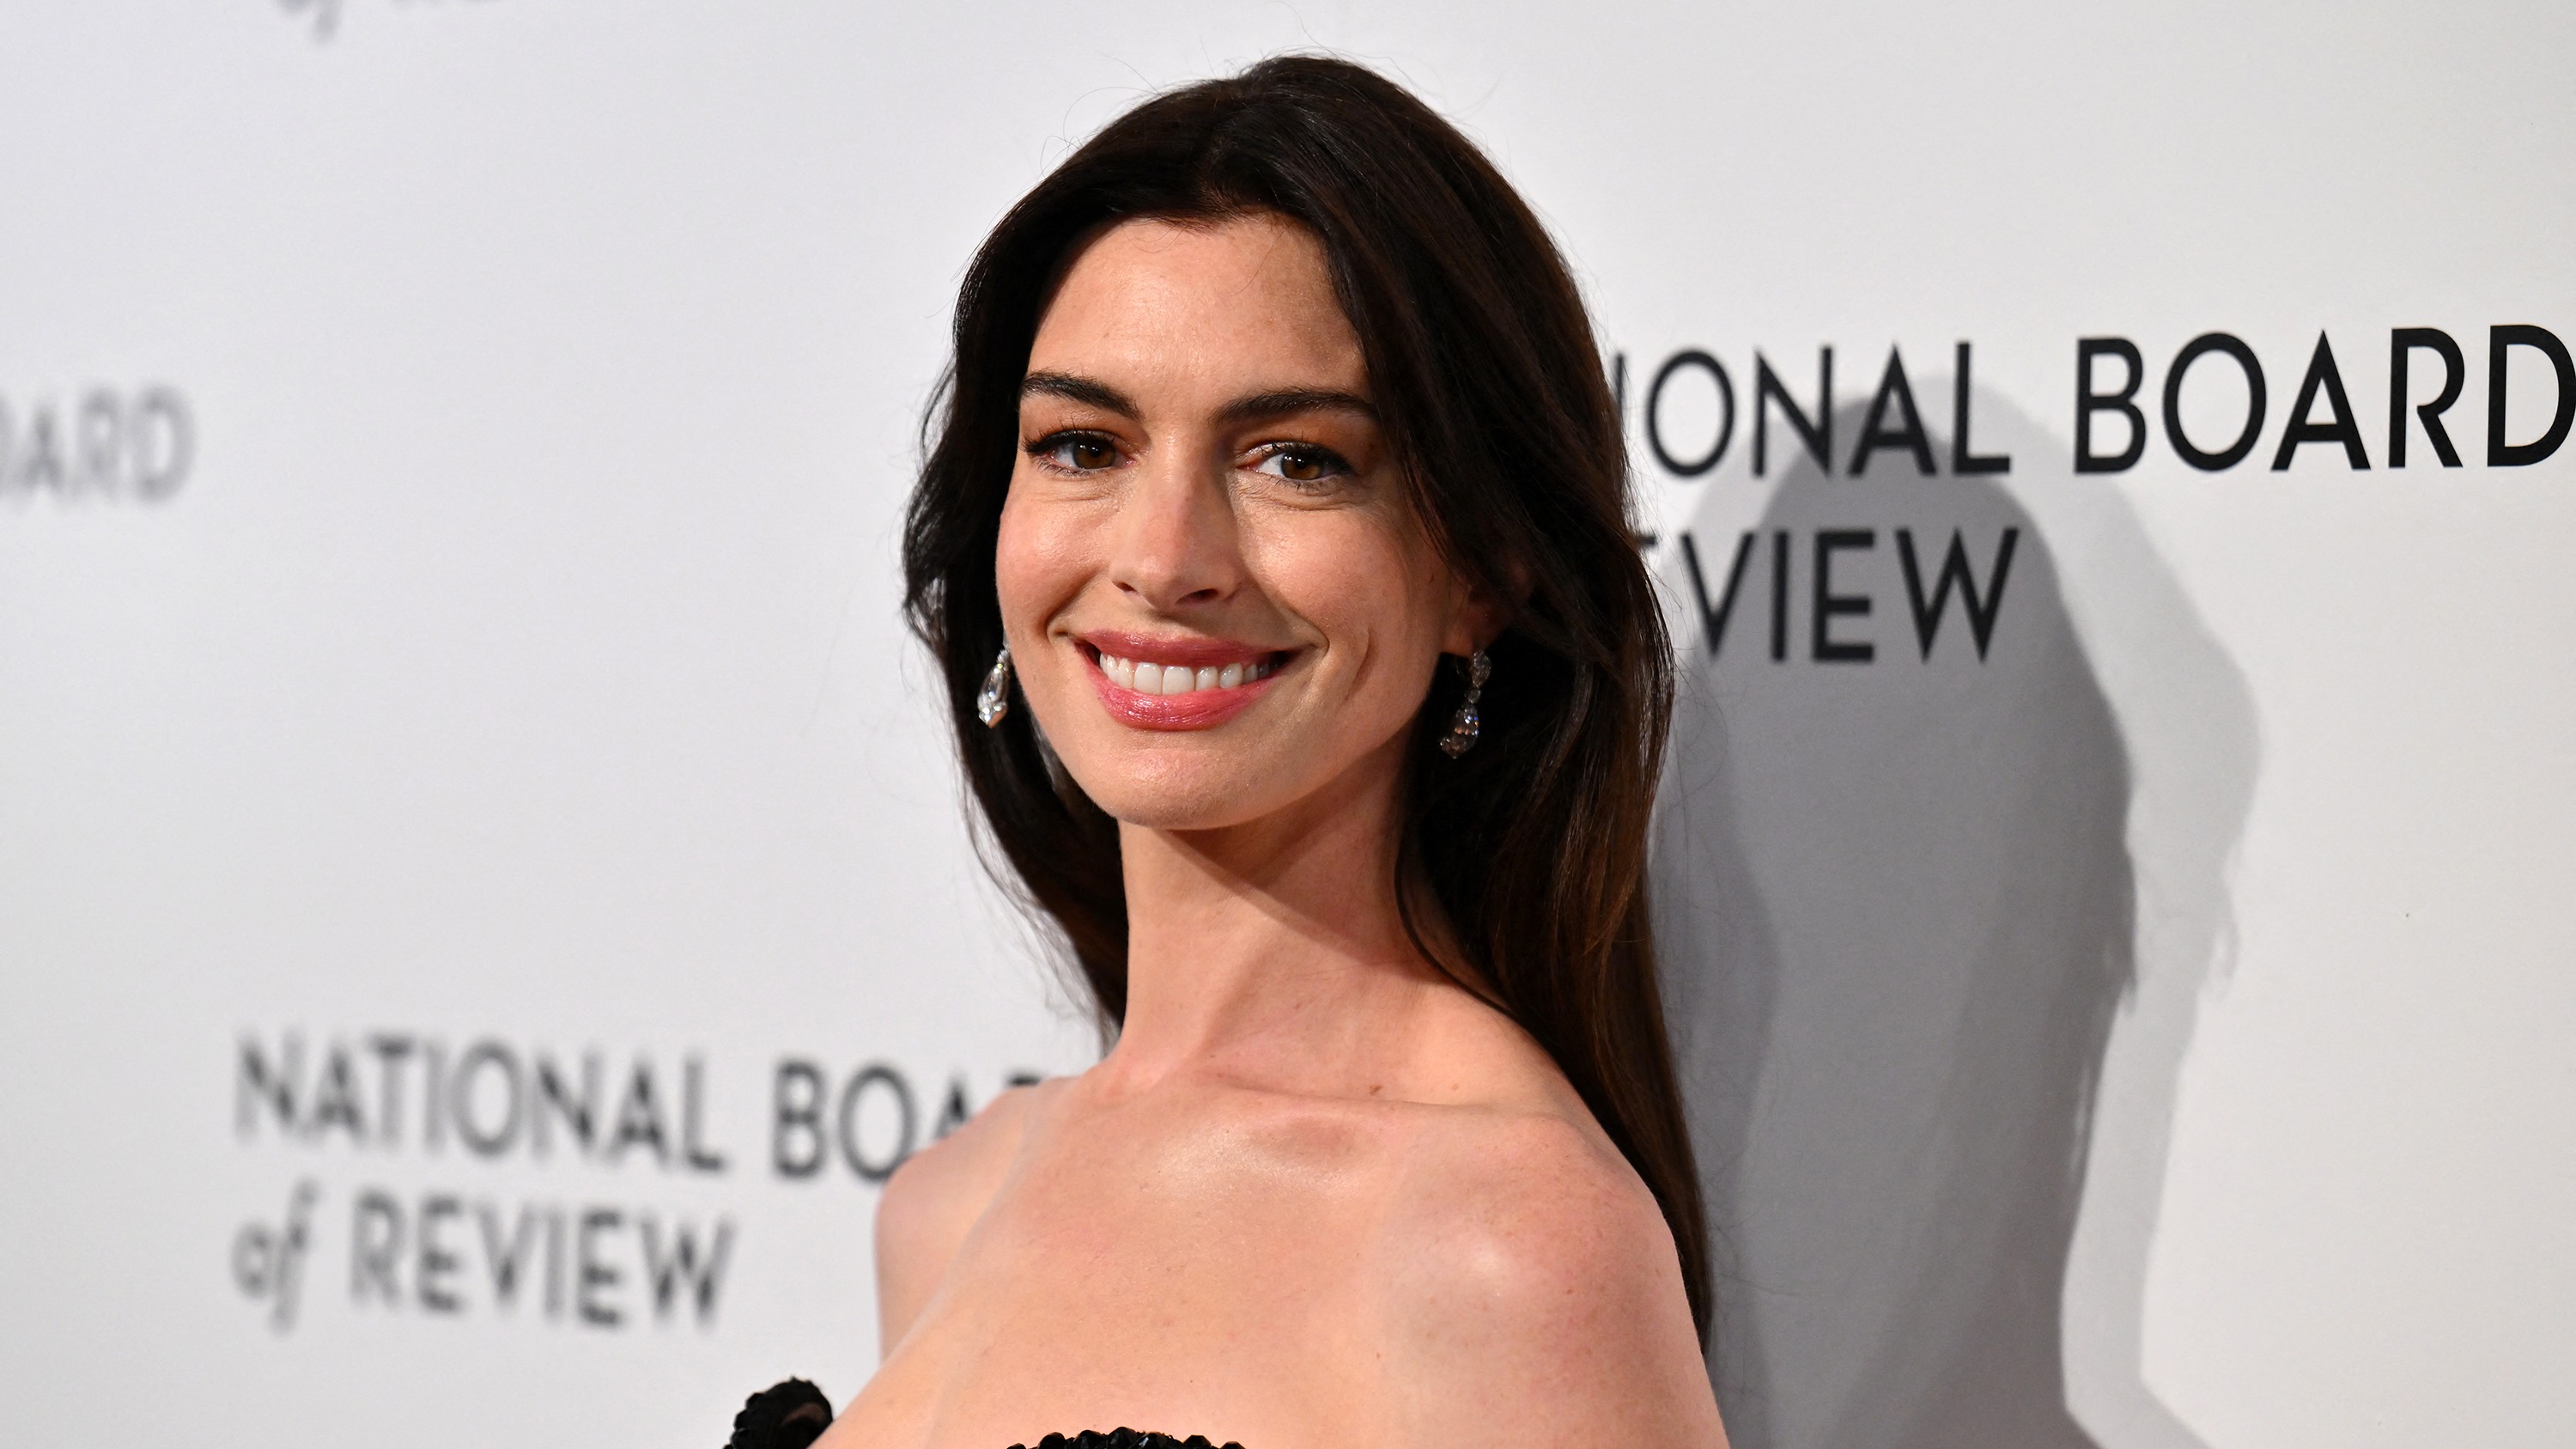 Anne Hathaway Reveals She Had a Miscarriage While Playing a Pregnant Character